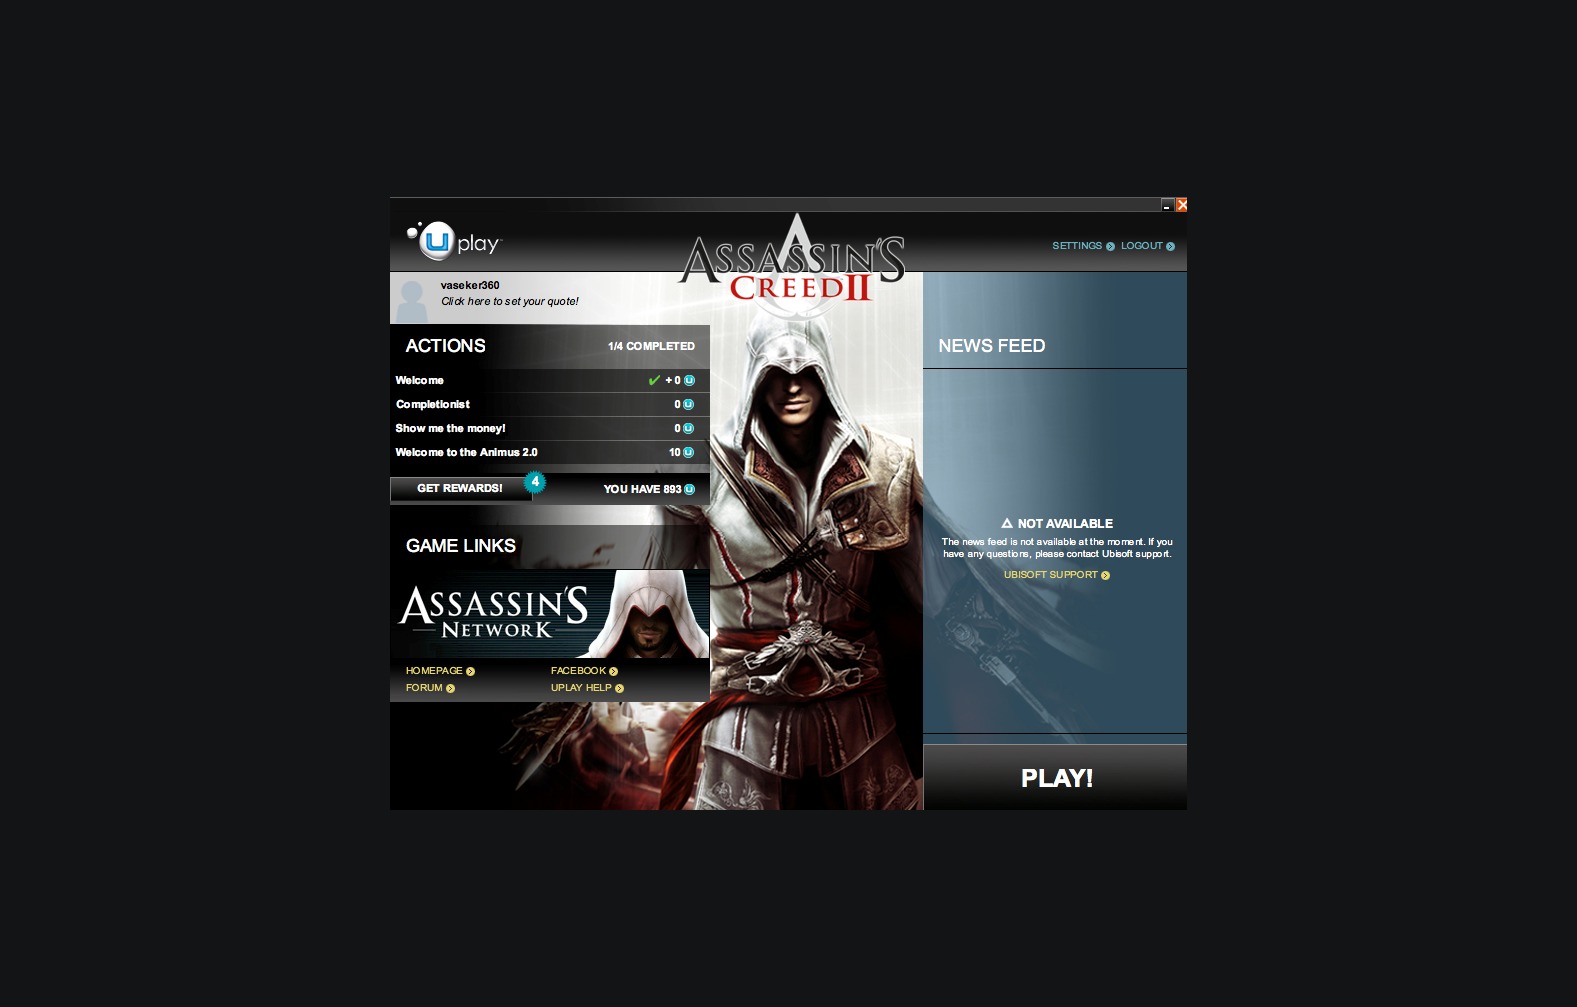 Before - Ubisoft game launcher in 2011